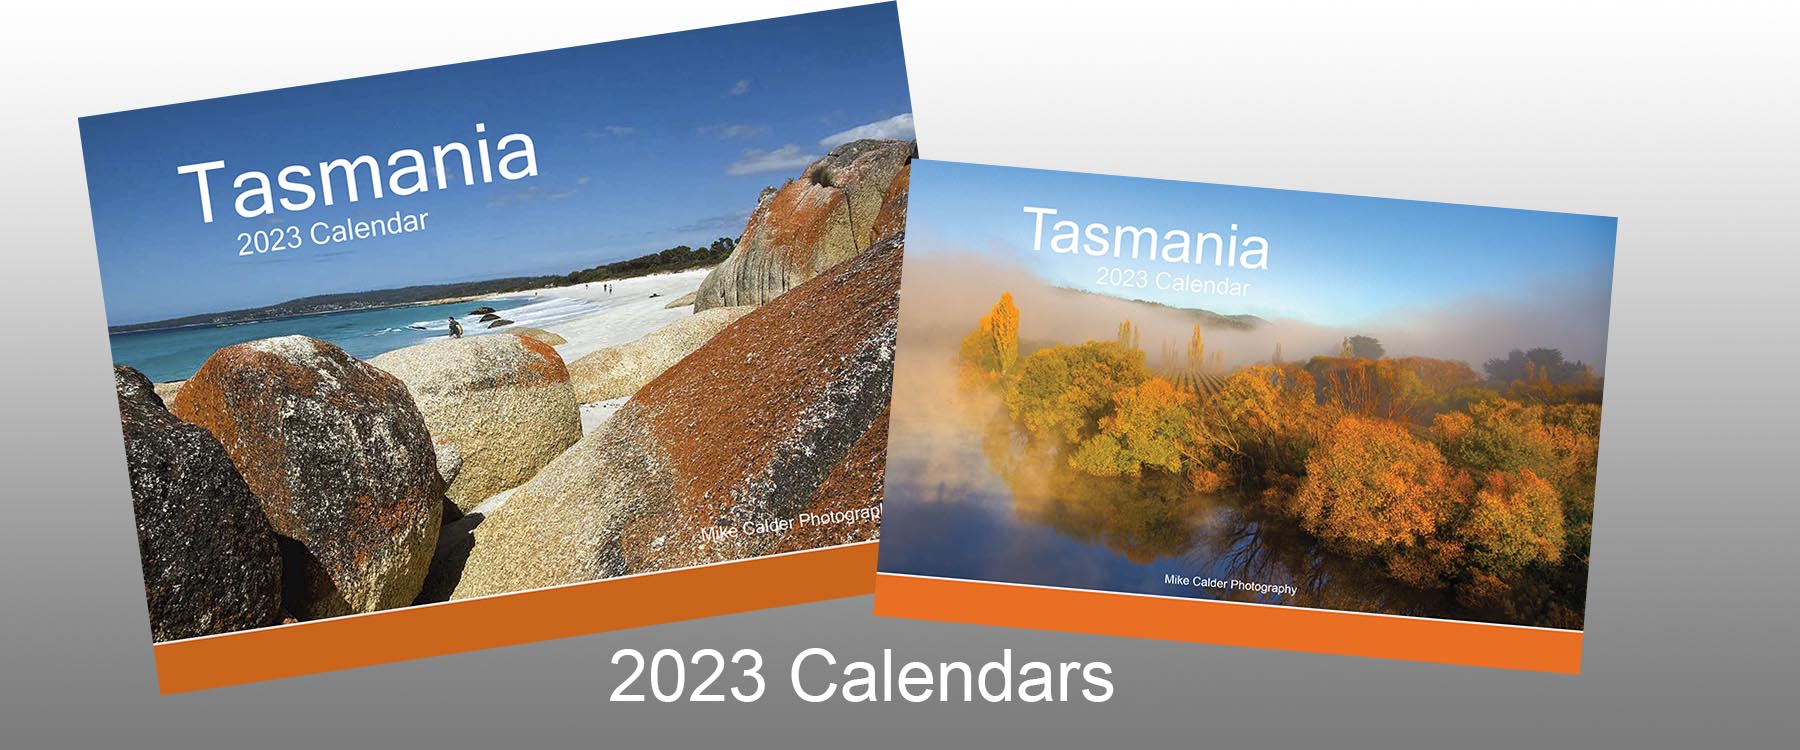 2023 calendars with background